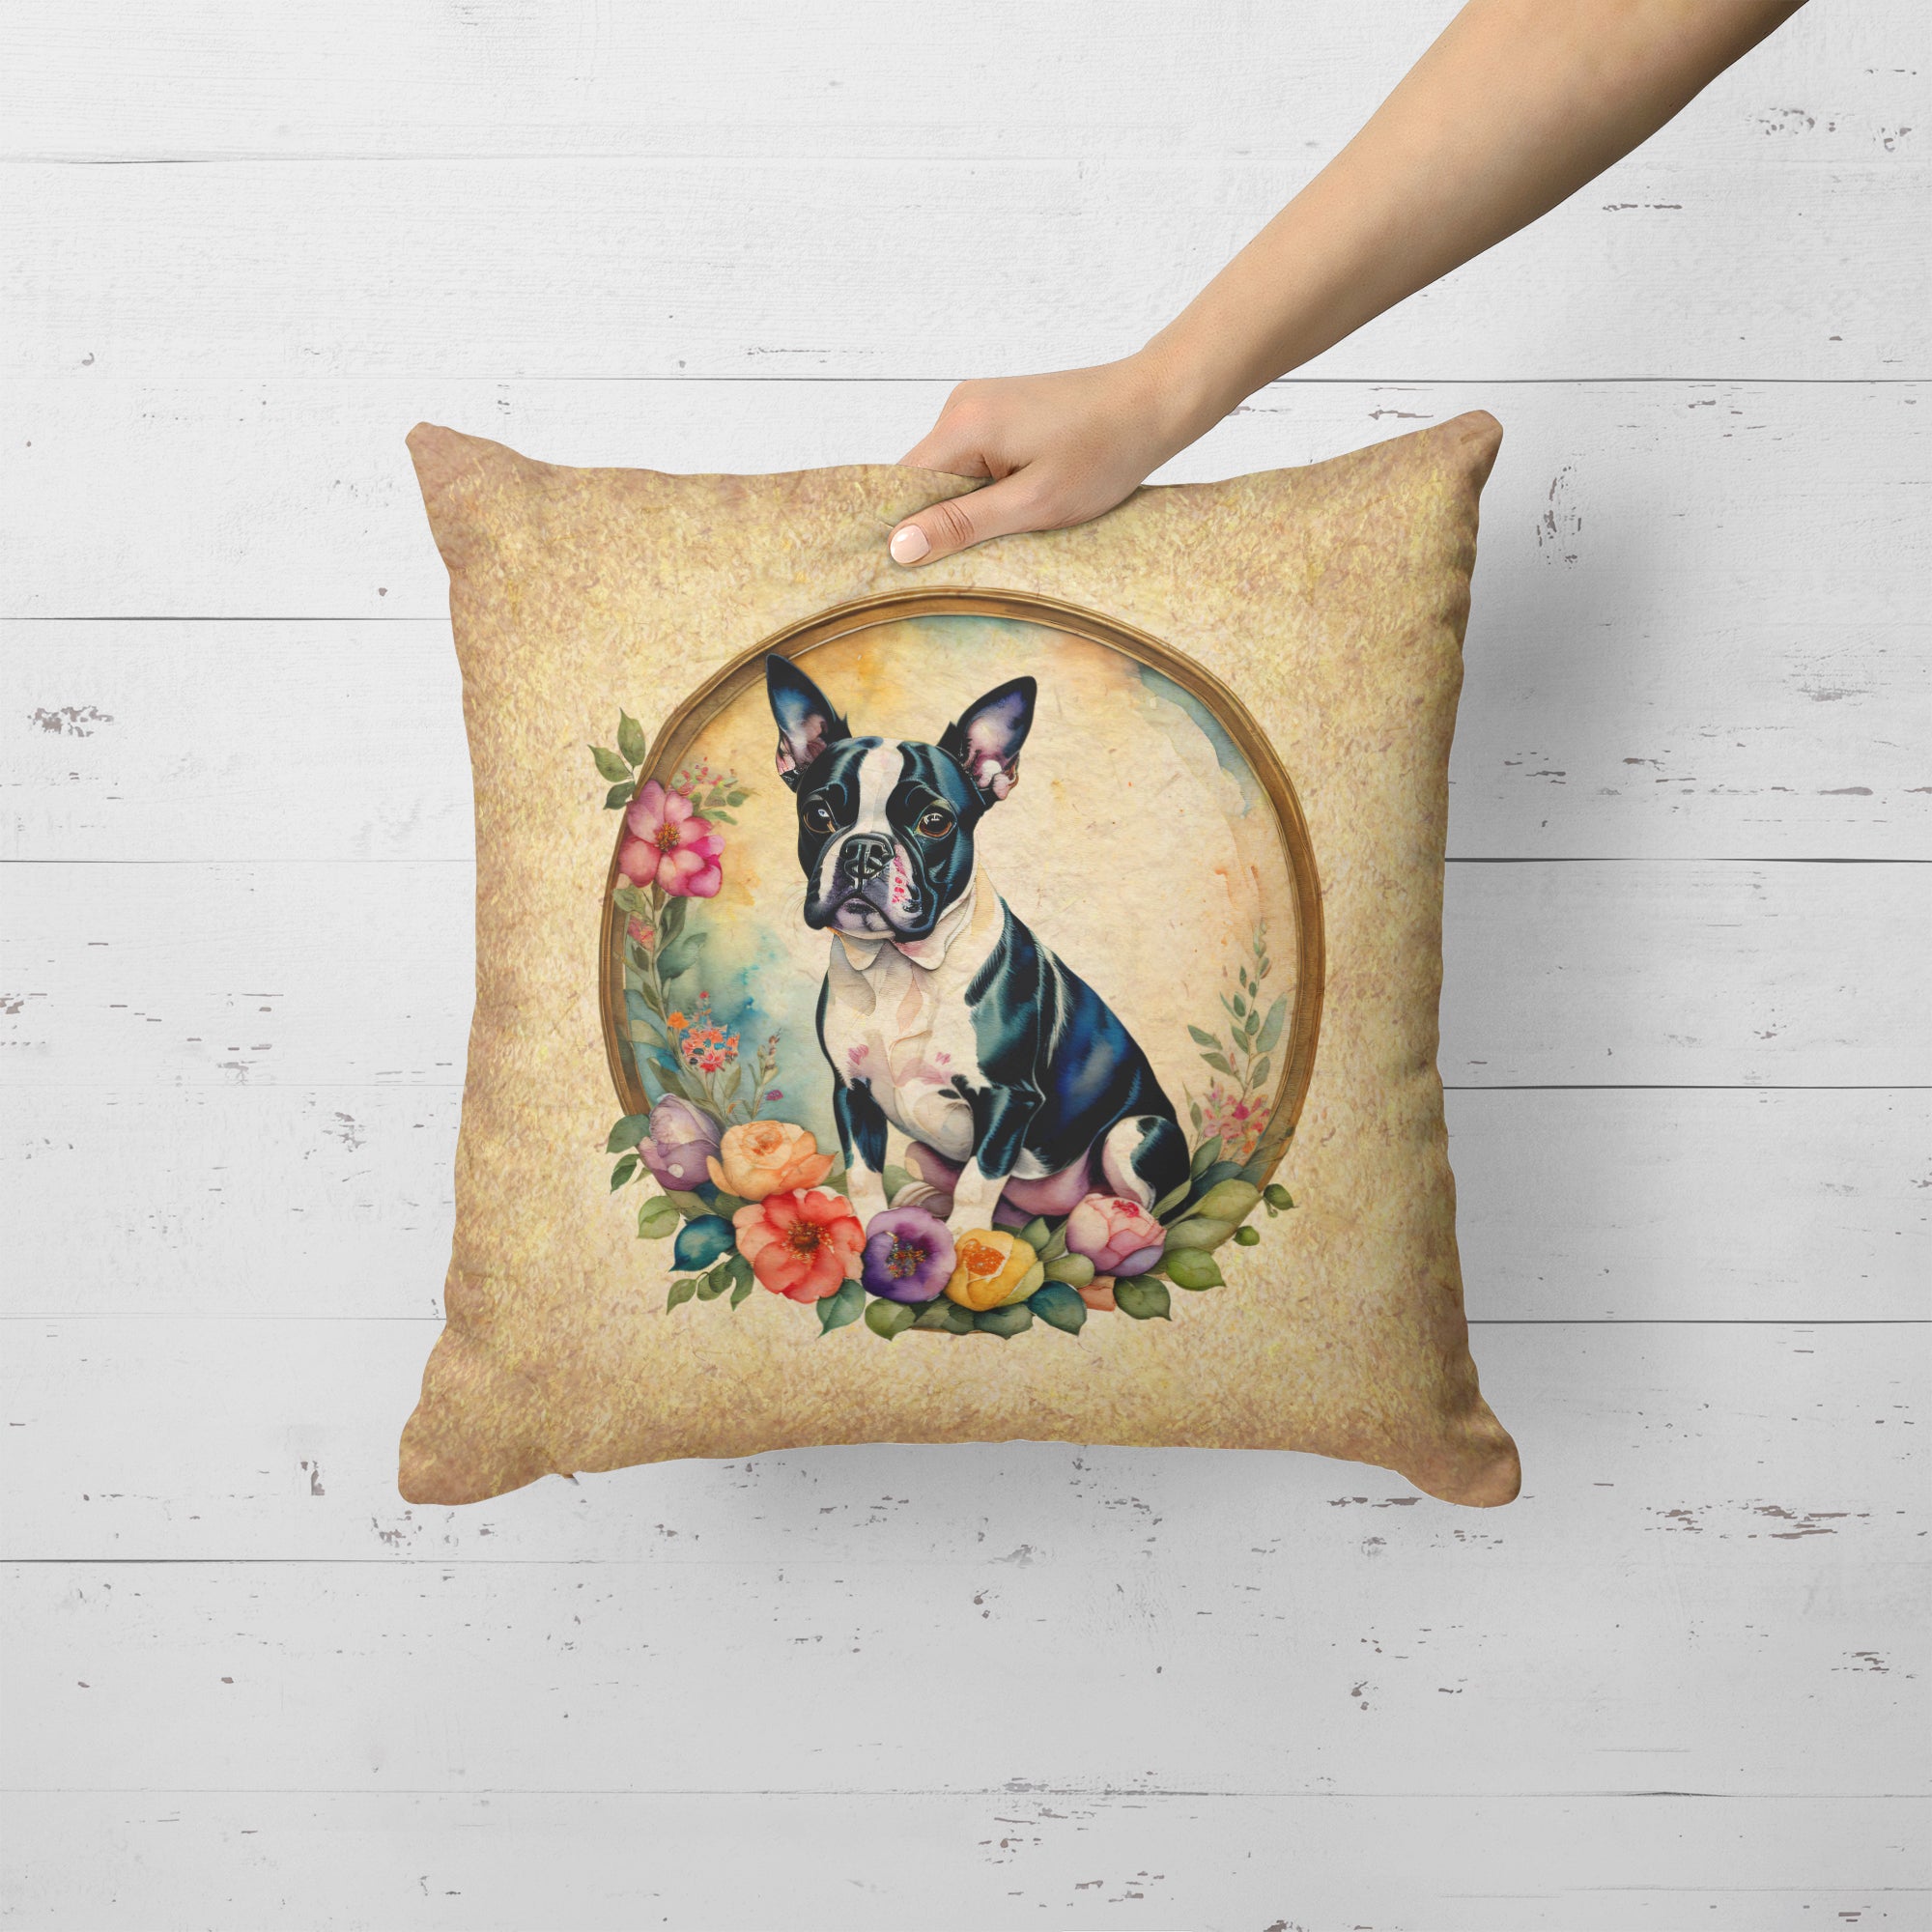 Buy this Boston Terrier and Flowers Fabric Decorative Pillow